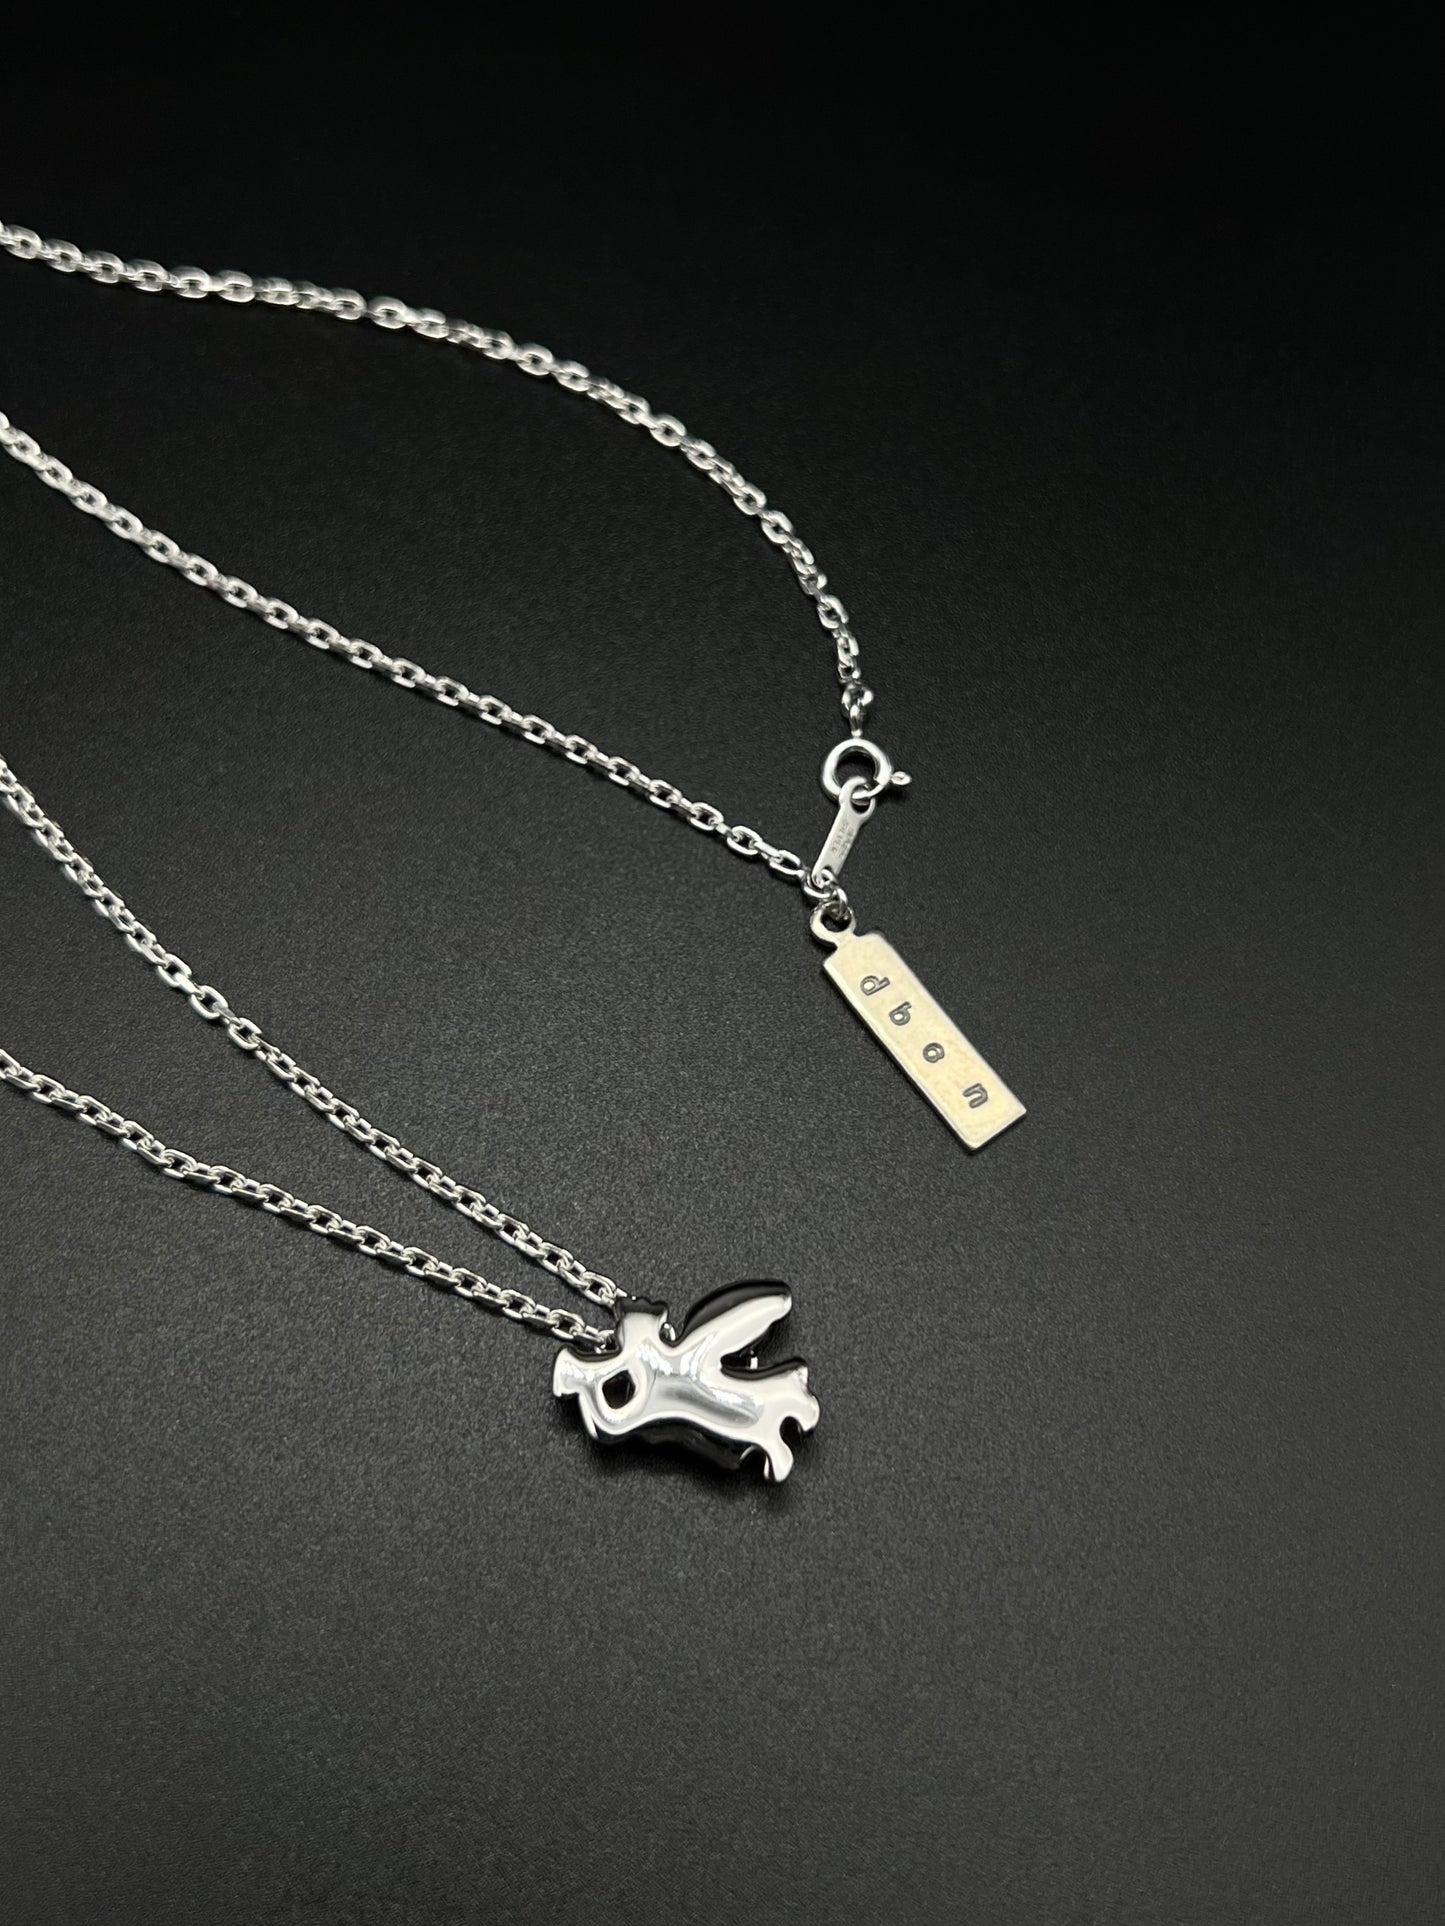 Angel necklace -silver925